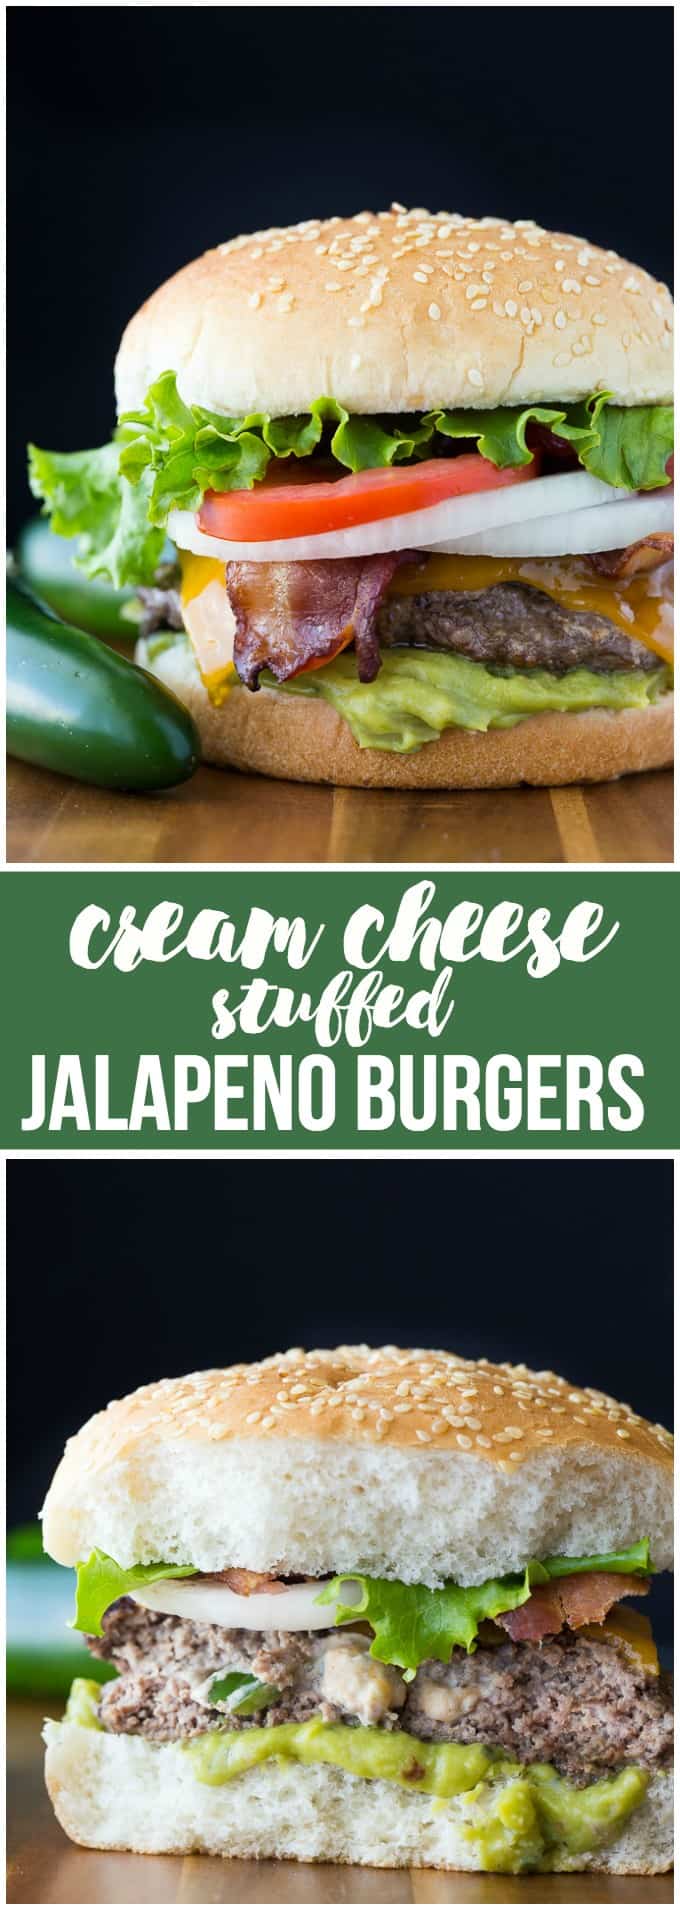 Cream Cheese Stuffed Jalapeno Burgers - Skip the jalapeño poppers and put them in your burger! These stuffed cheeseburgers are filled with a creamy and spicy center for a flavor explosion.